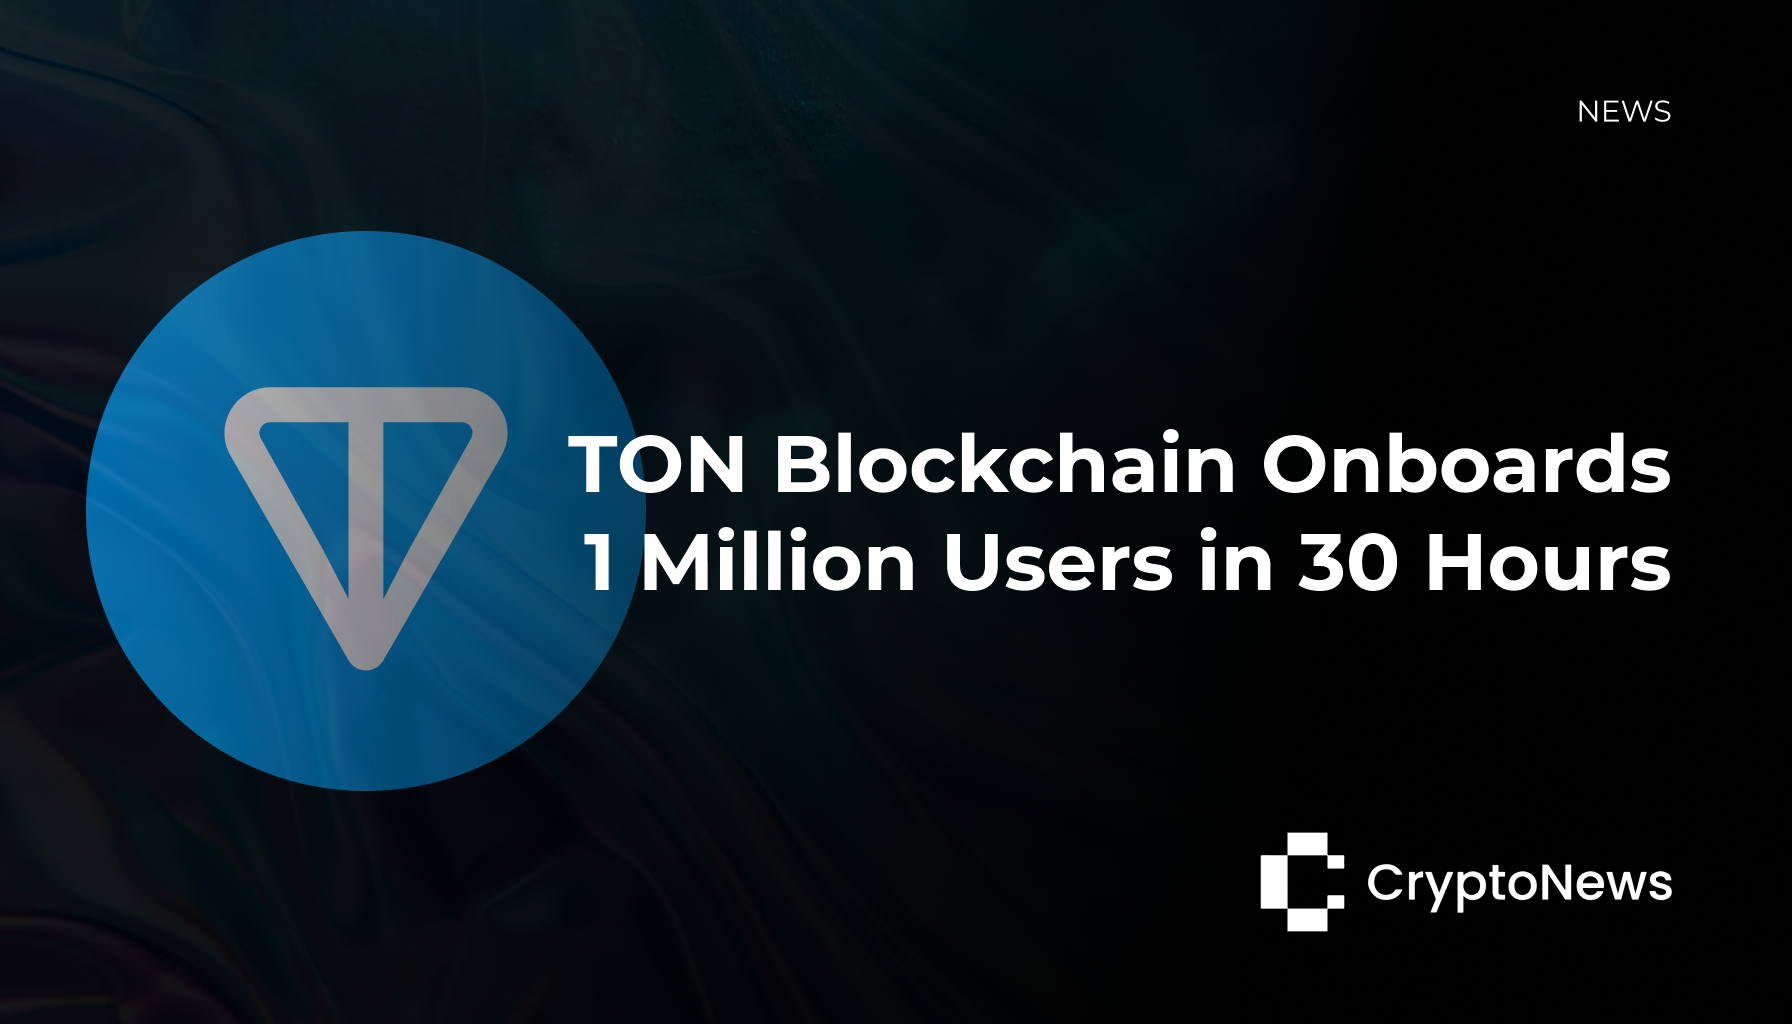 TON Blockchain logo with the text "TON Blockchain Onboards 1 Million Users in 30 Hours"